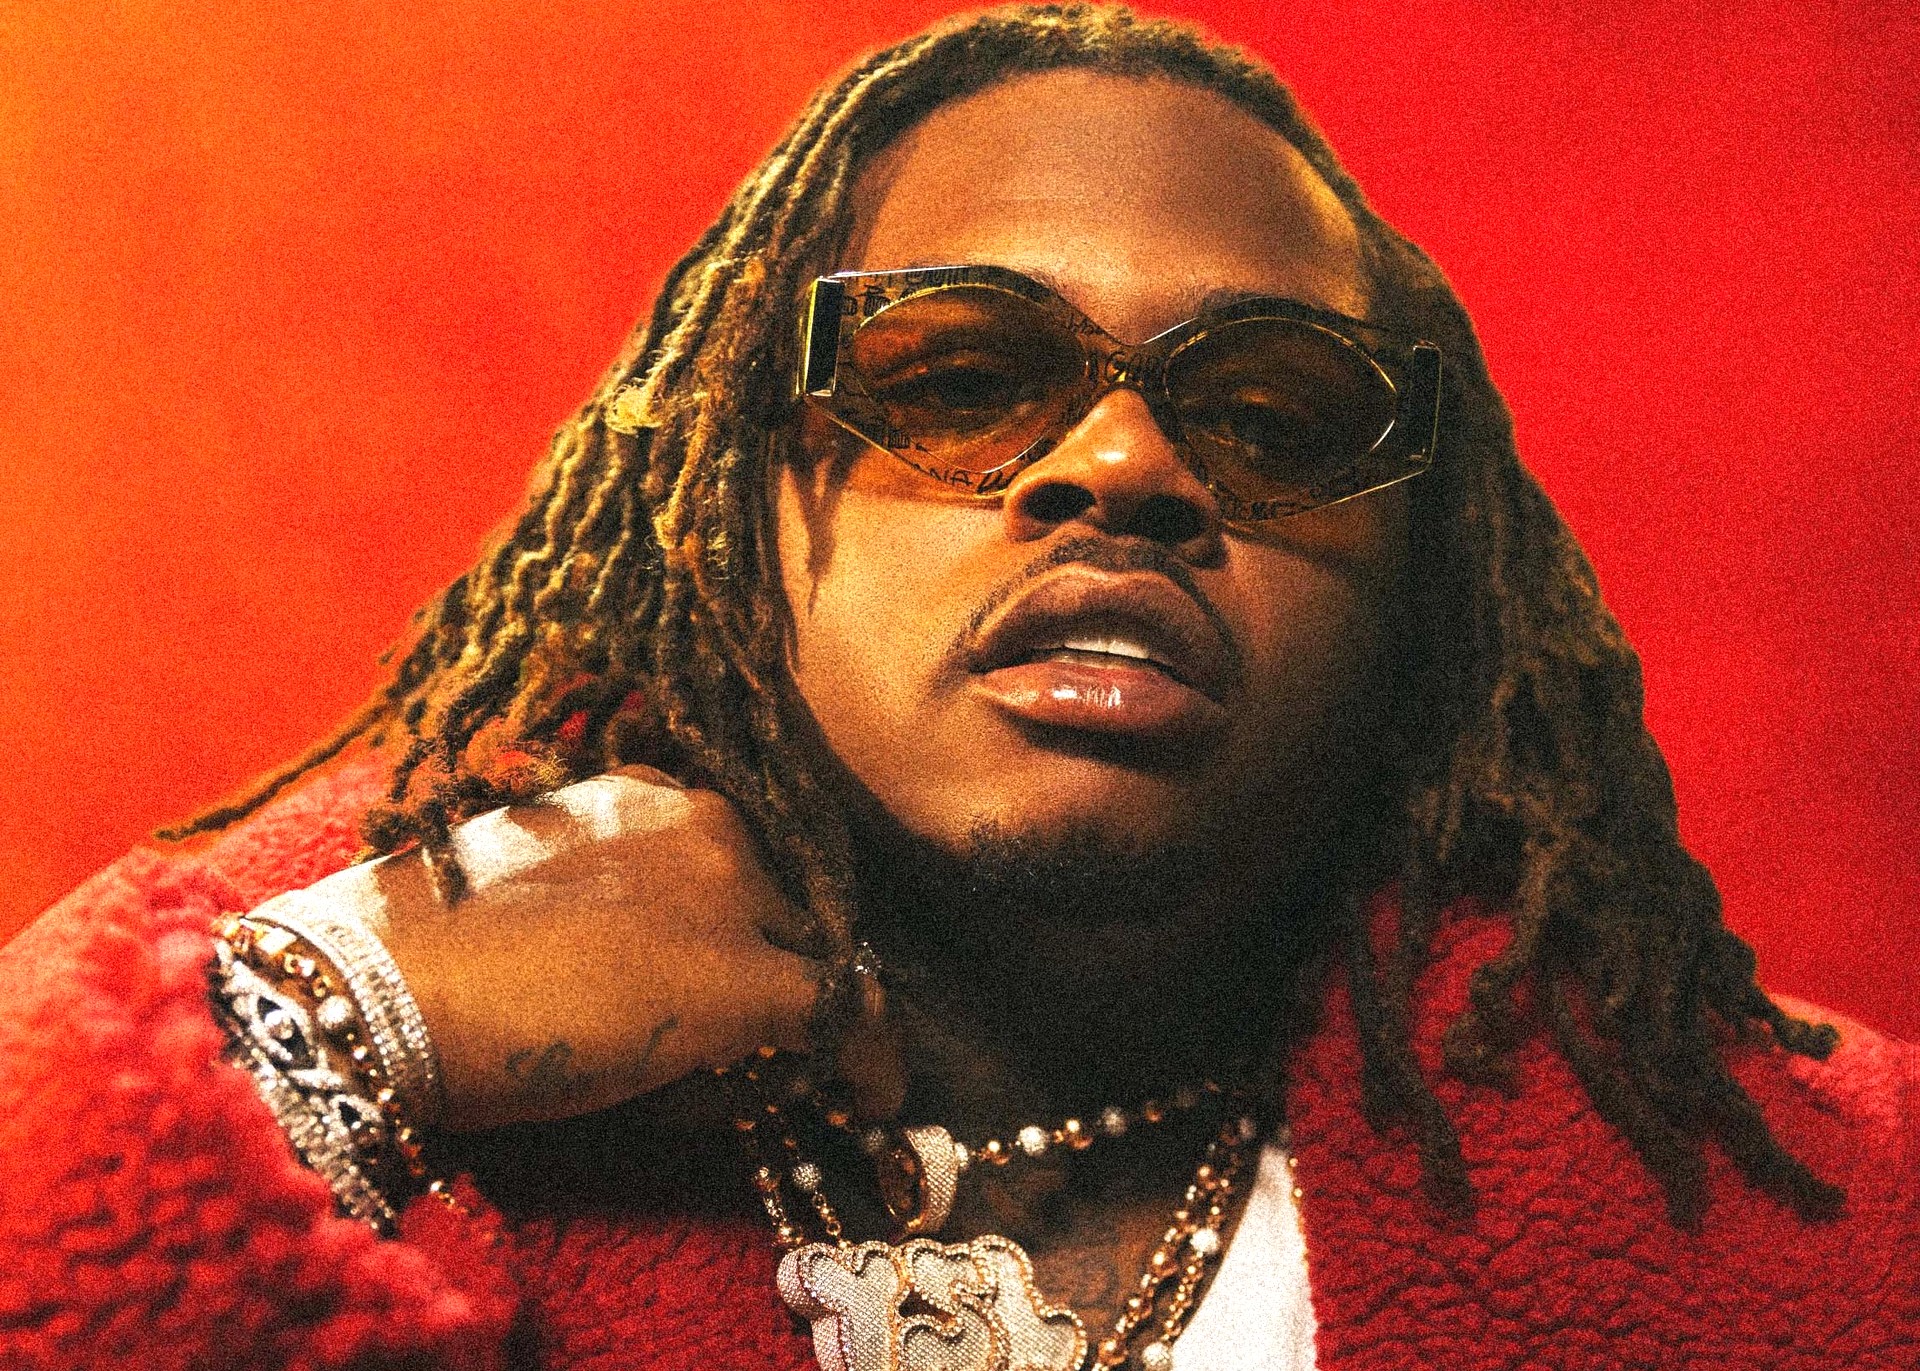 Gunna to Be Released From Prison After Pleading GUILTY to Racketeering Charge, Insists He Hasn’t Testified Against Anyone